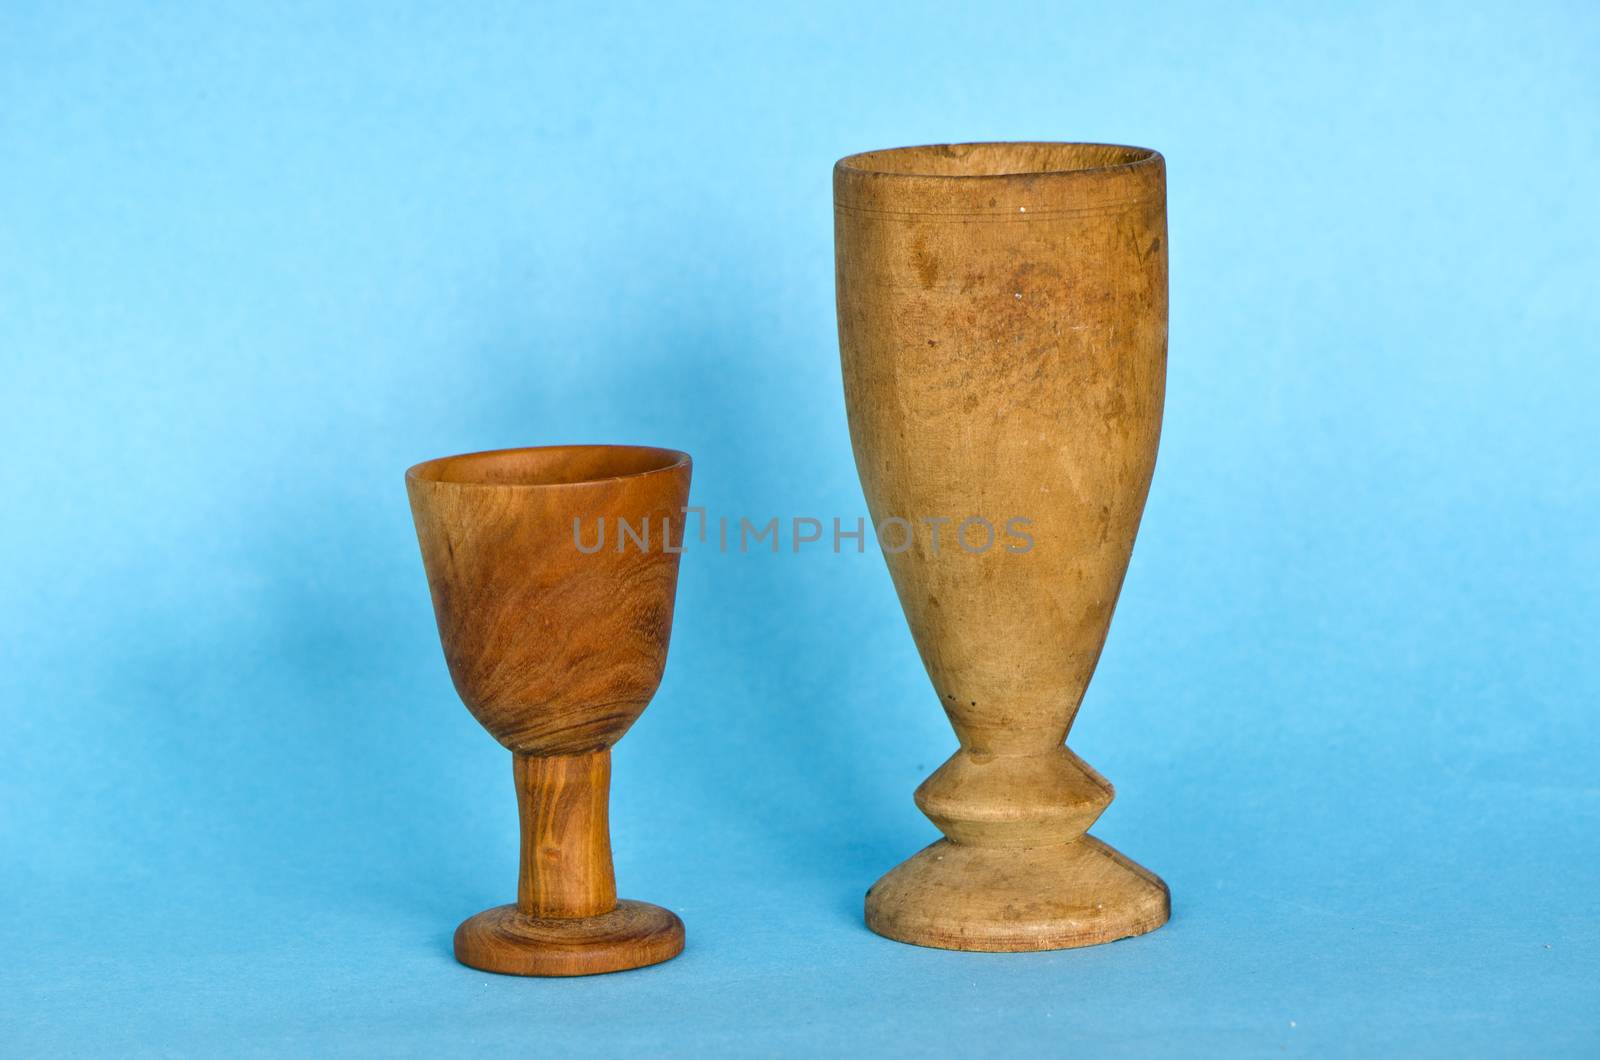 Two wooden antique handmade glasses cup on blue background